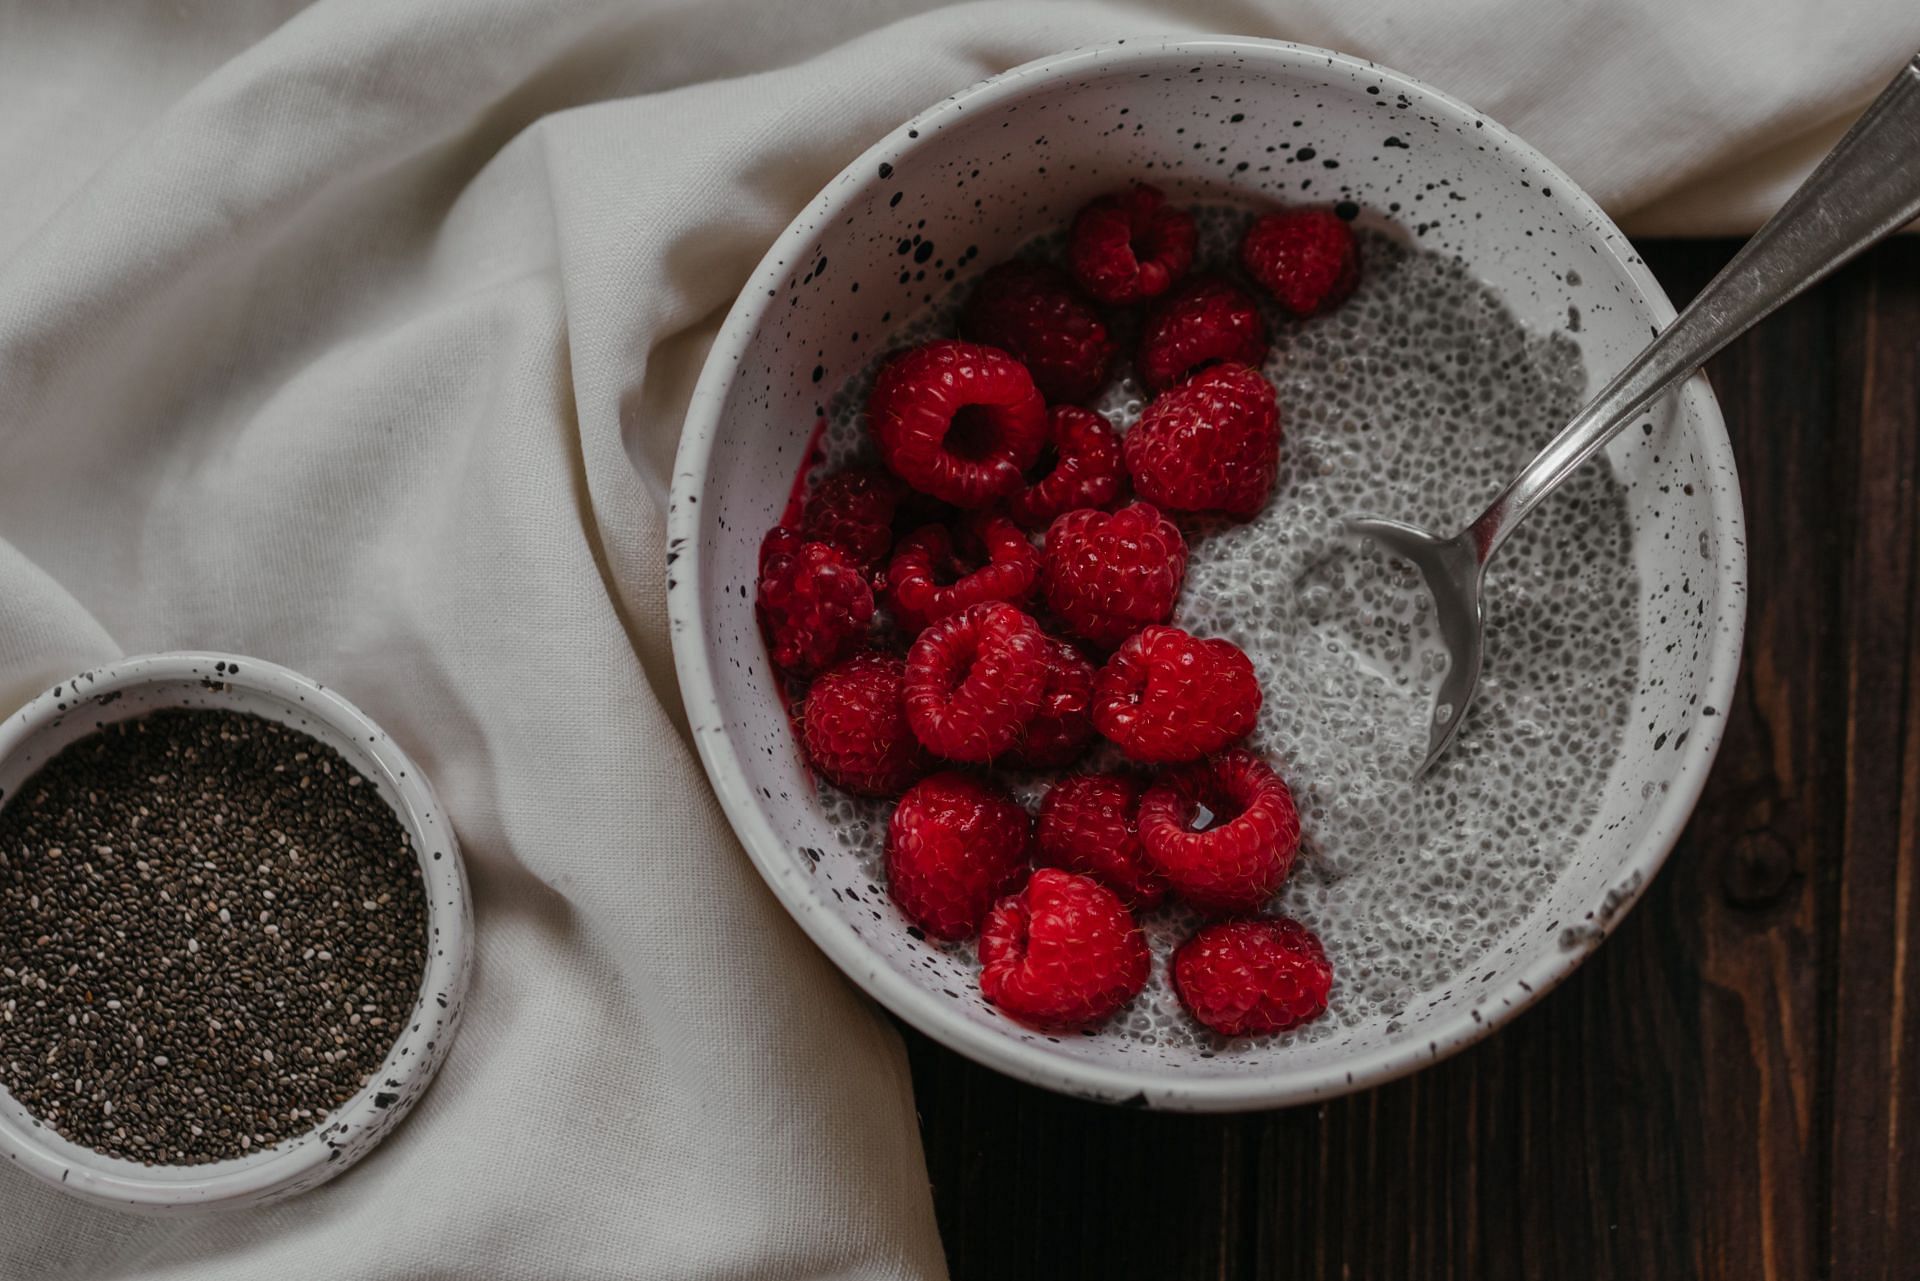 Gluten free diet is recommended to manage the symptoms. (Image via Pexels/ Polina Kovaleva)